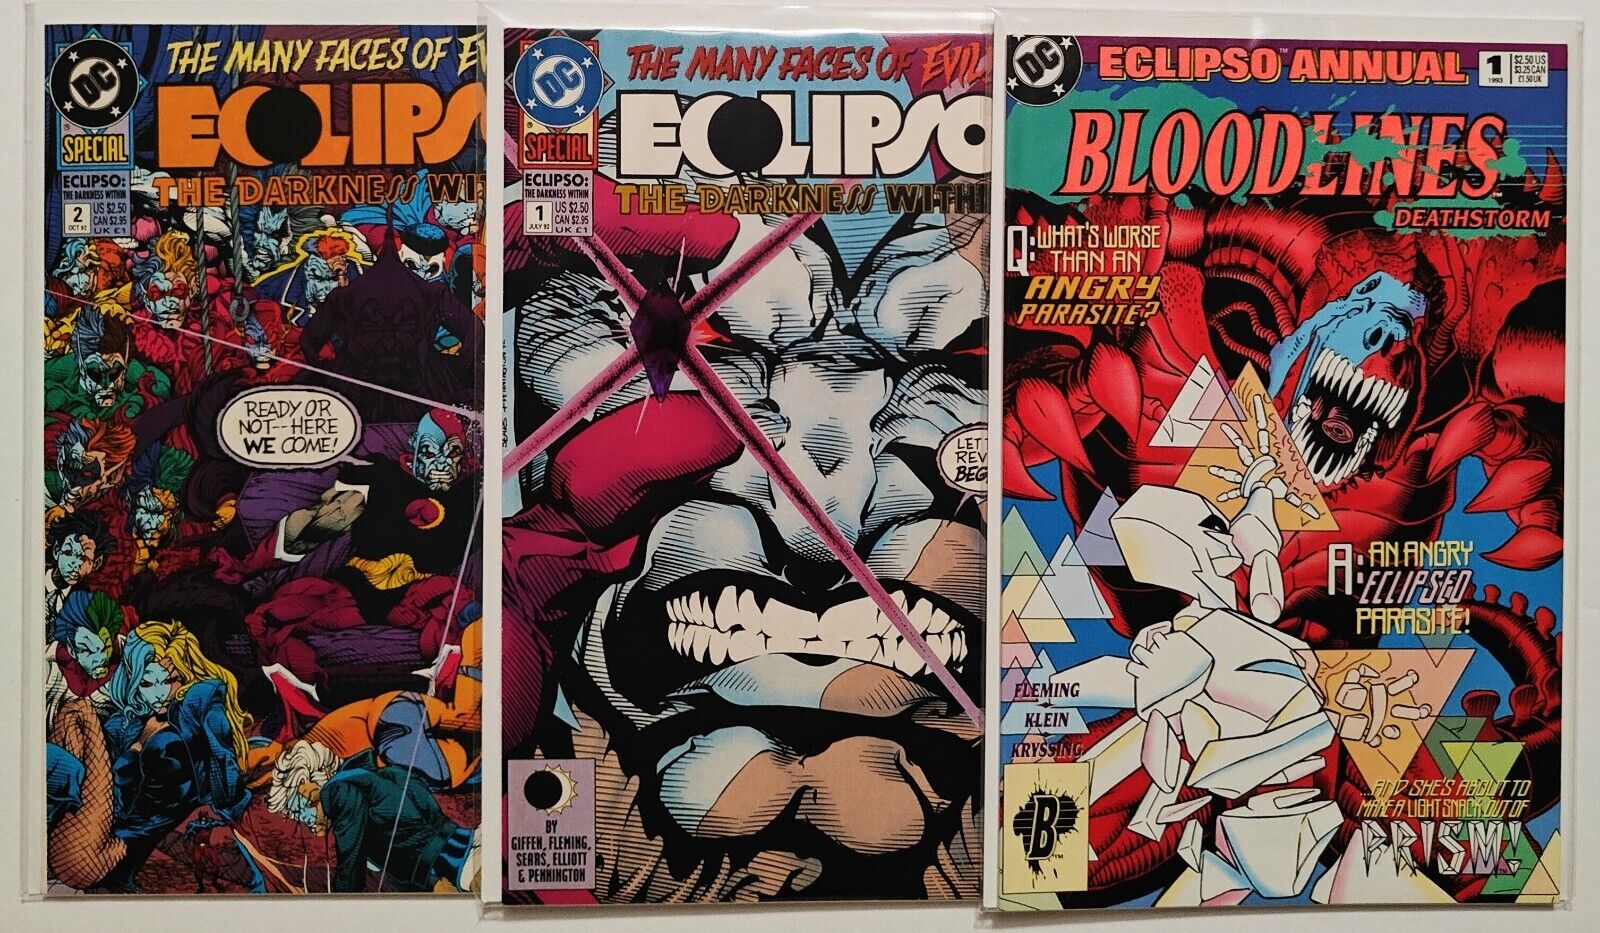 ECLIPSO: The Darkness Within #1, #2 (GEM VARIANT) + Annual #1 COMPLETE SET VF-NM